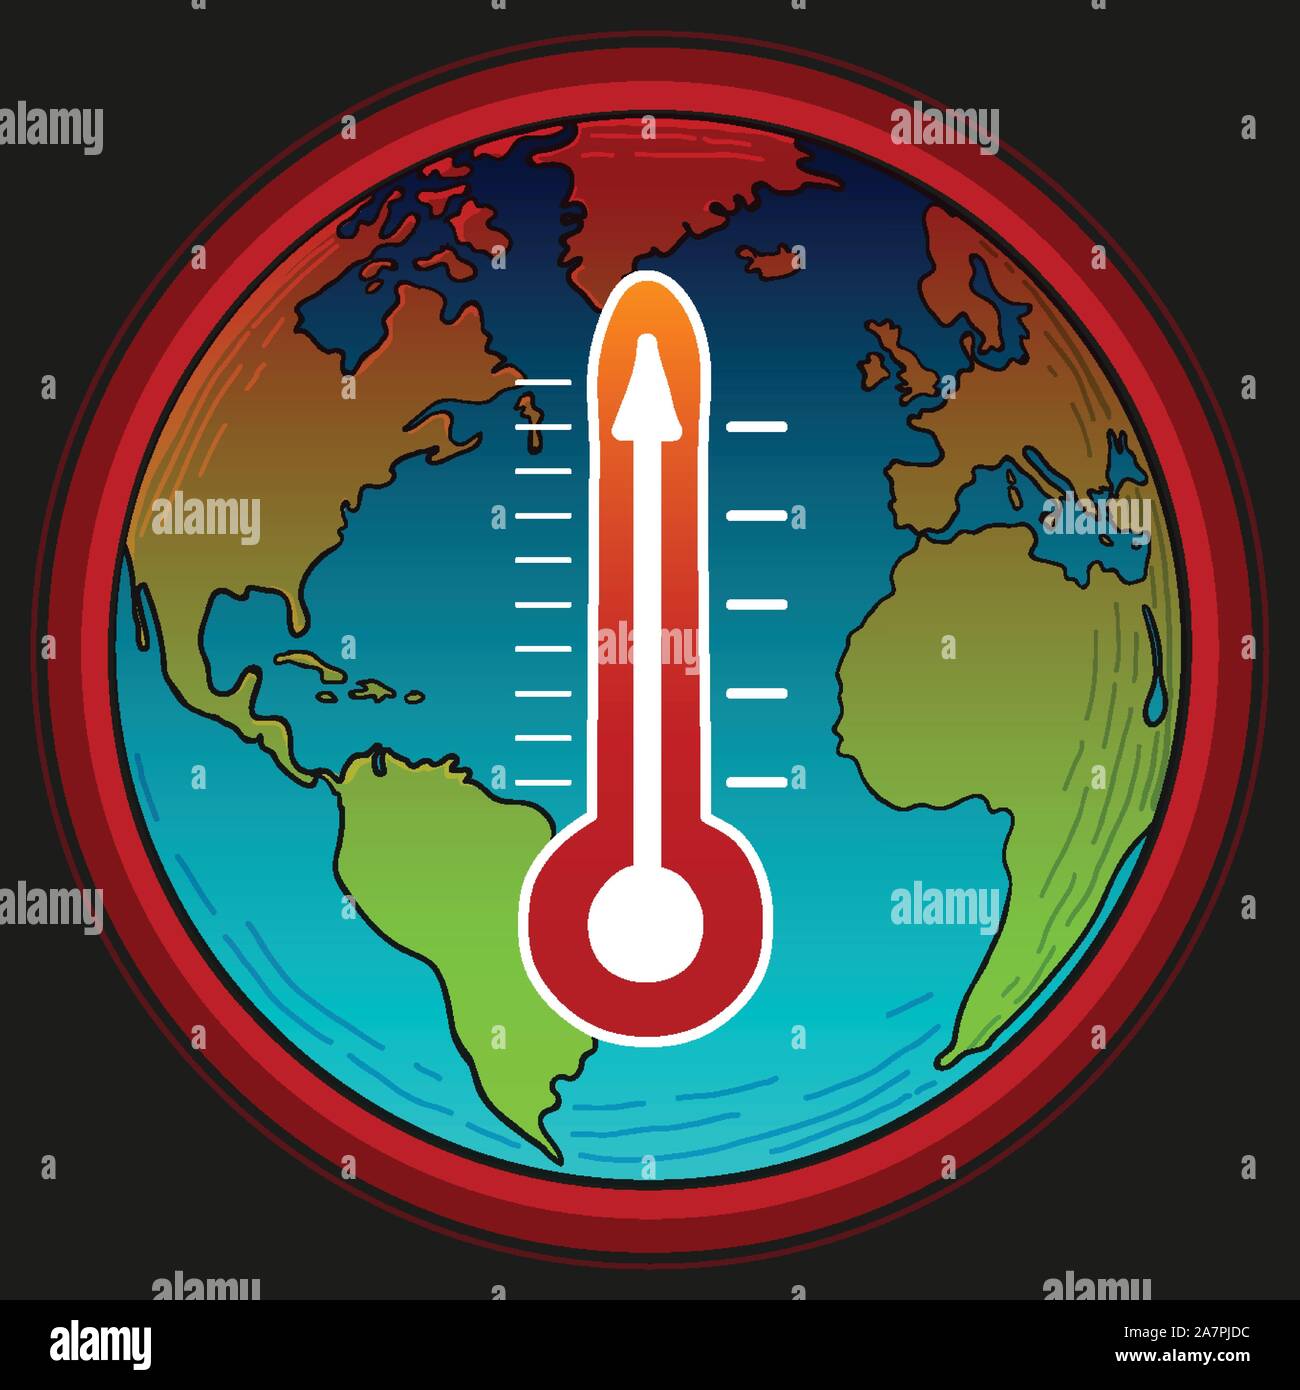 Global Warming Concept Illustration with Thermometer Stock Vector